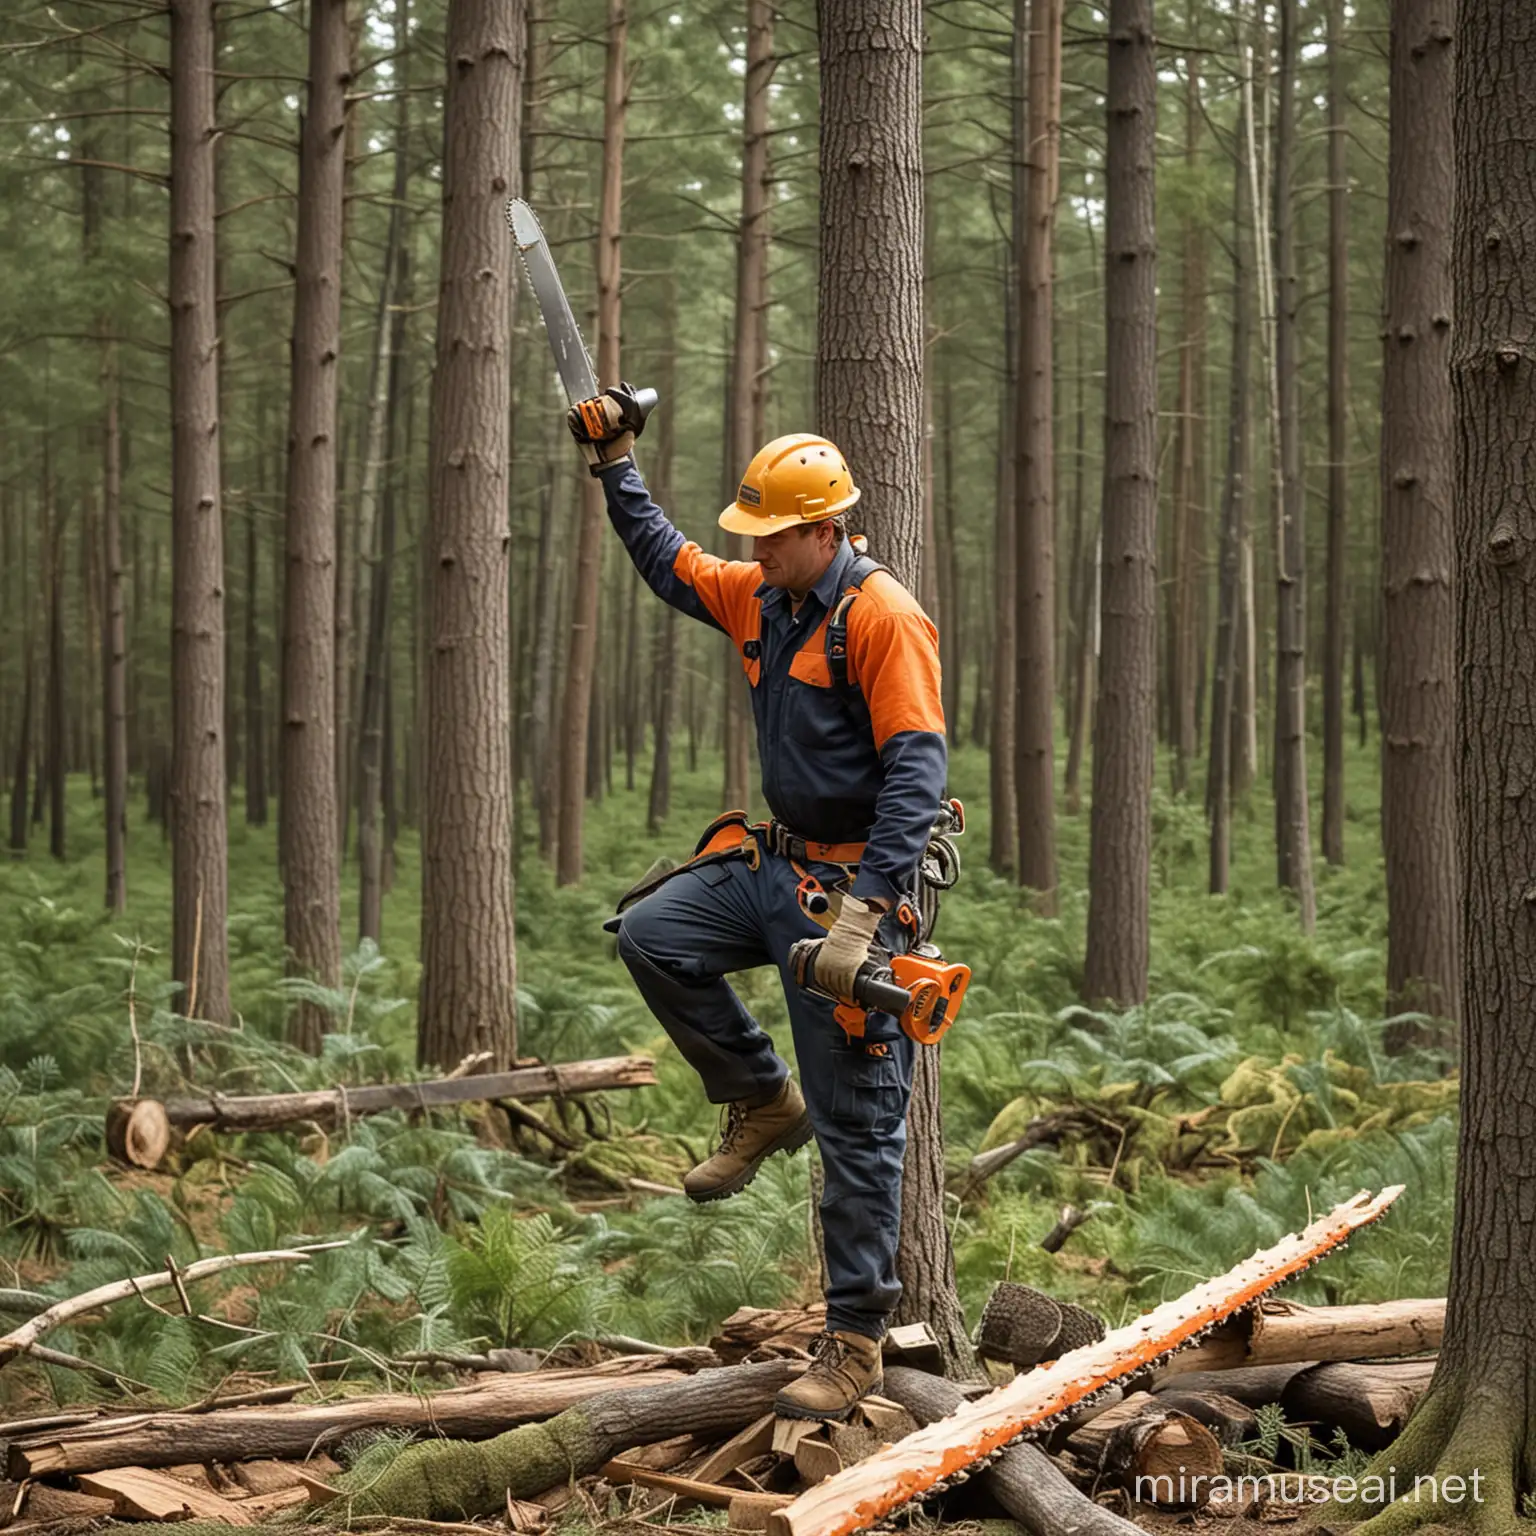 Forestry Worker Operating Chainsaw in Upright Posture